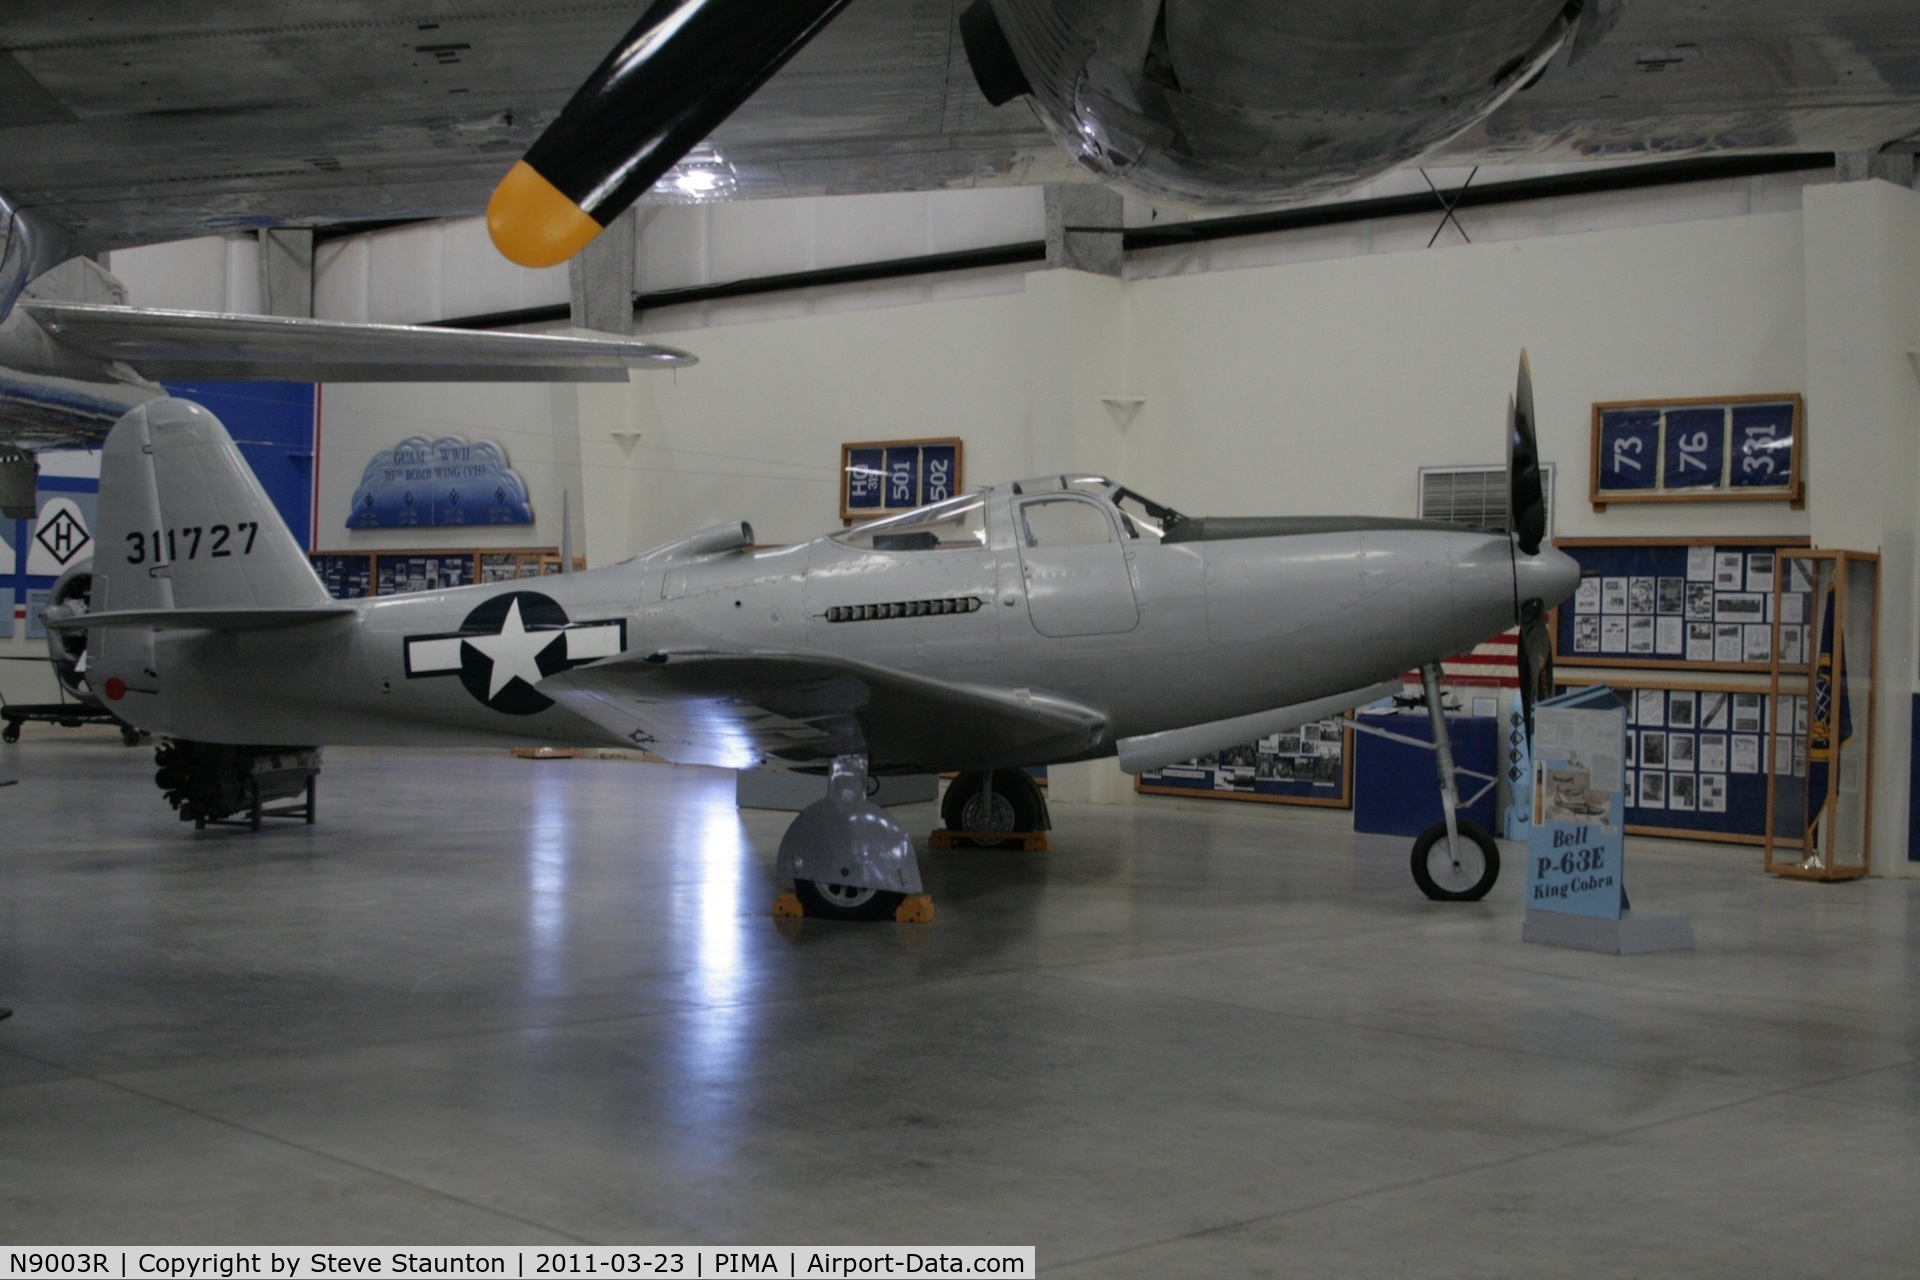 N9003R, 1943 Bell P-63E-1-BE Kingcobra C/N 4311727 (400 FAHo), Taken at Pima Air and Space Museum, in March 2011 whilst on an Aeroprint Aviation tour